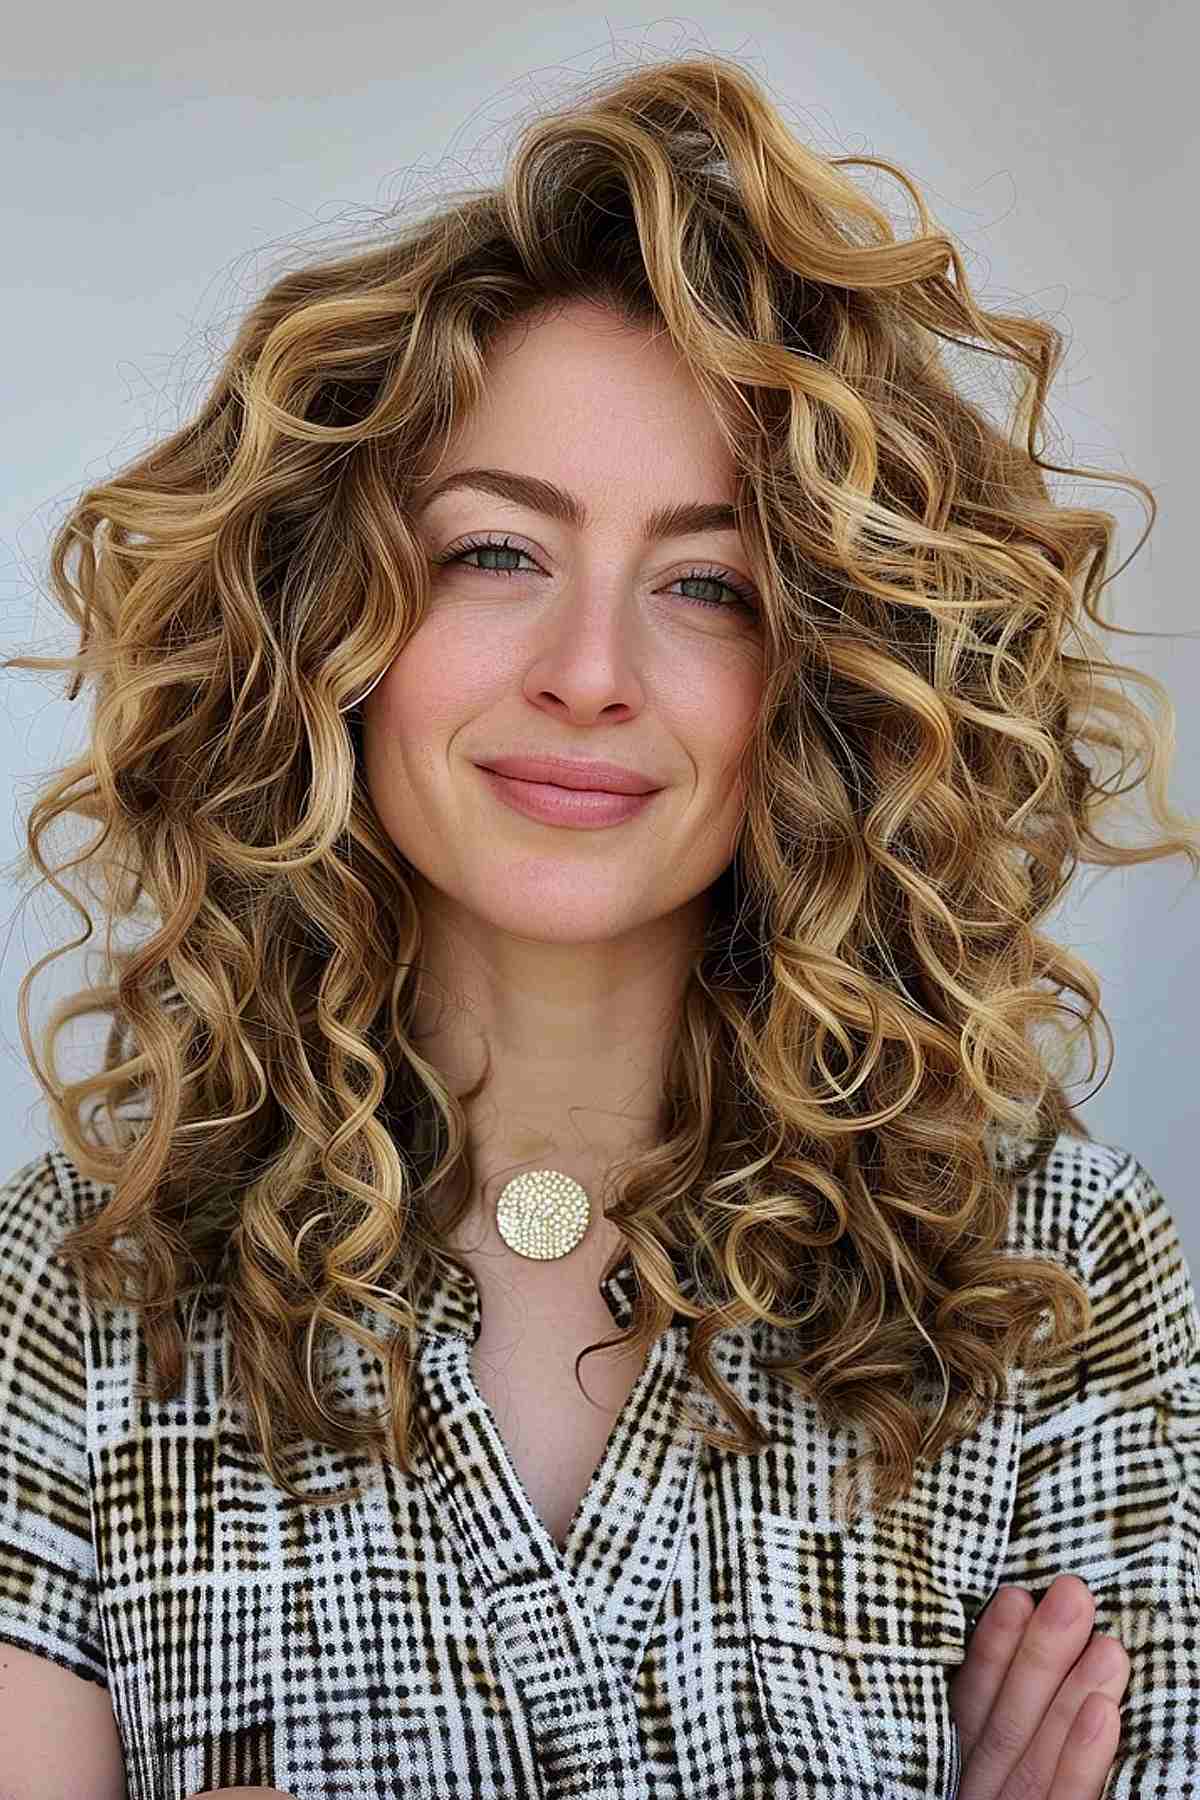 Curly dark hair with thick blonde highlights and layered cut